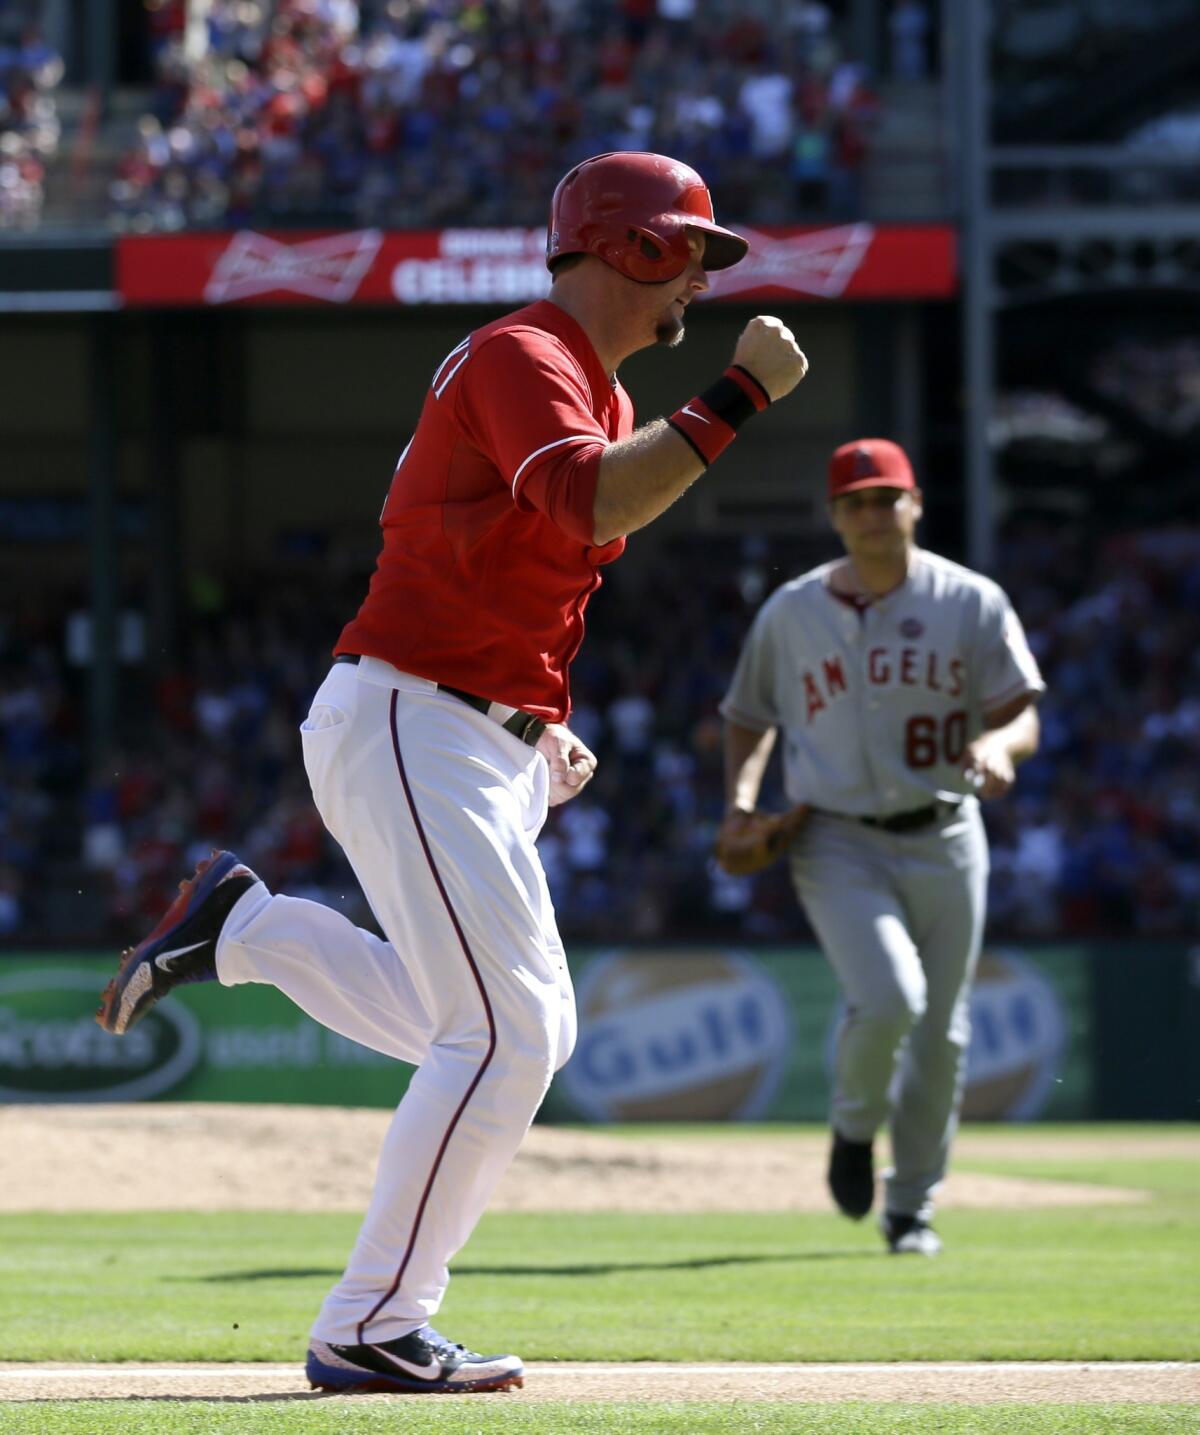 Texas designated hitter A.J. Pierzynski celebrates as he scores a run during the Angels' 6-2 loss Sunday.